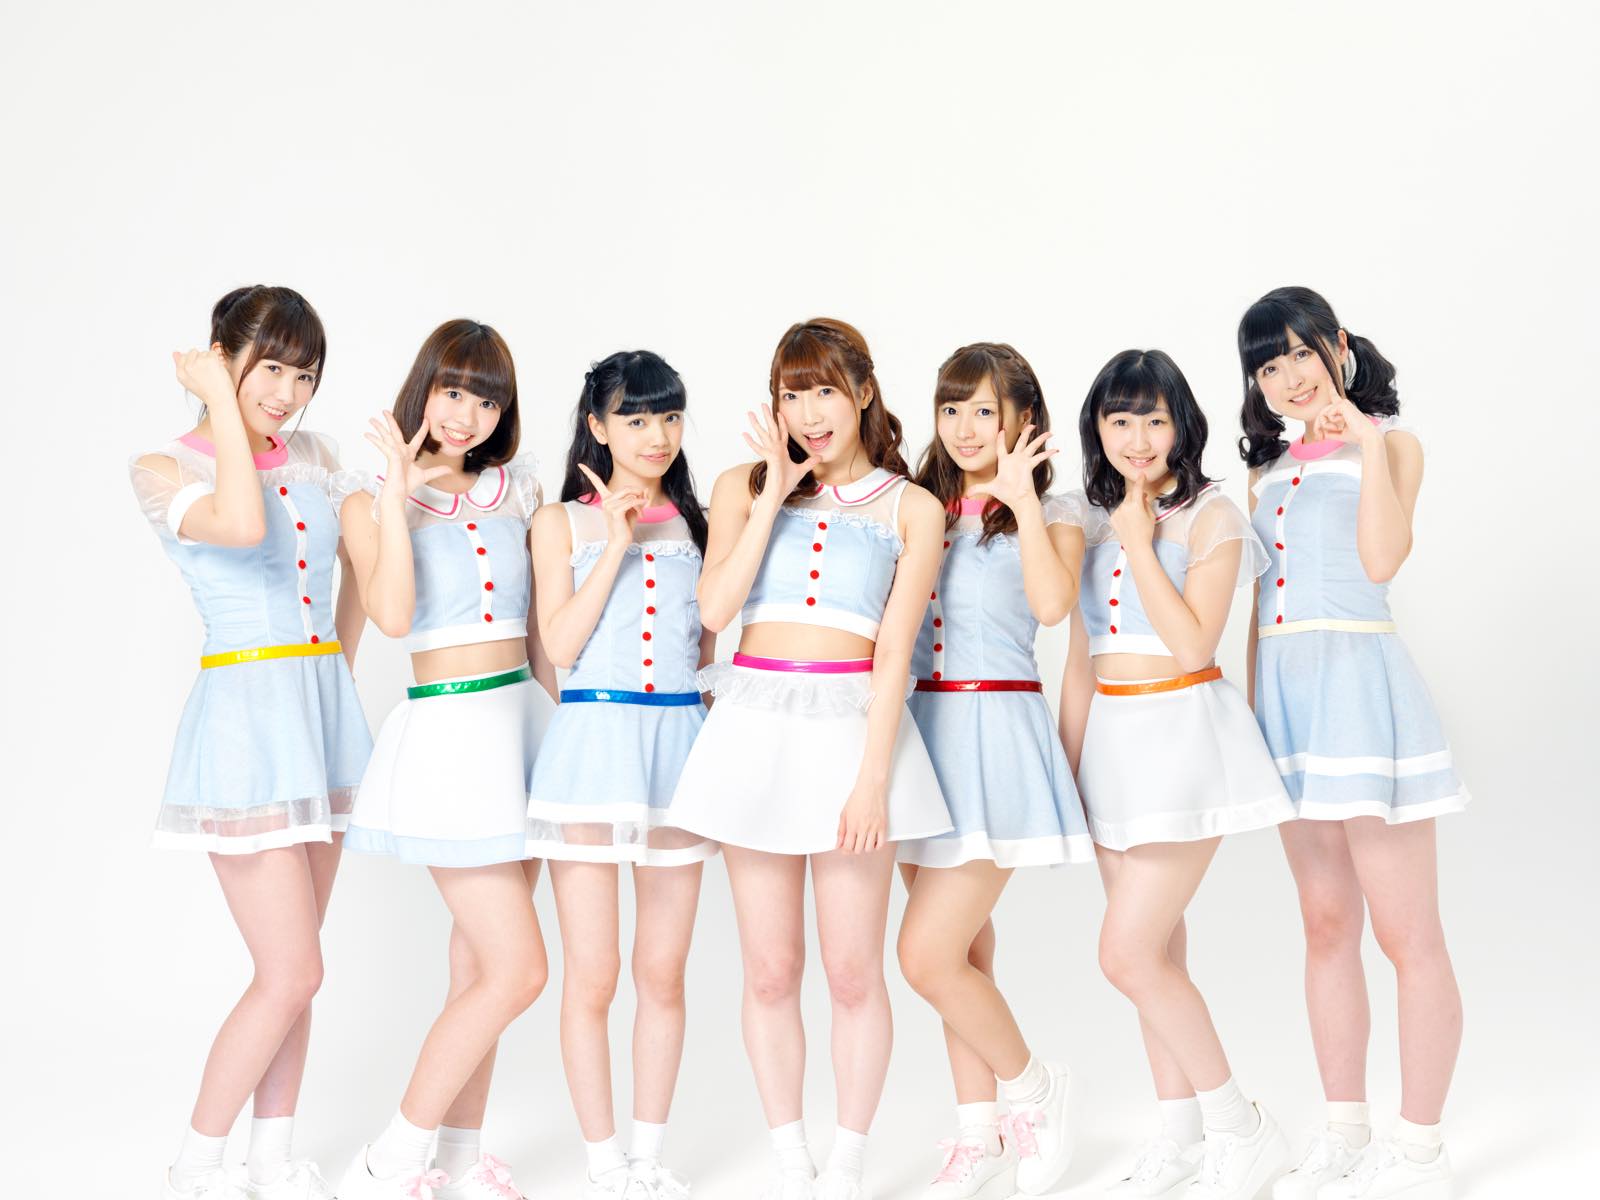 Lovely★DOLL Rush to Assemble a Production Team in the MV for “Heatup Dreamer”!